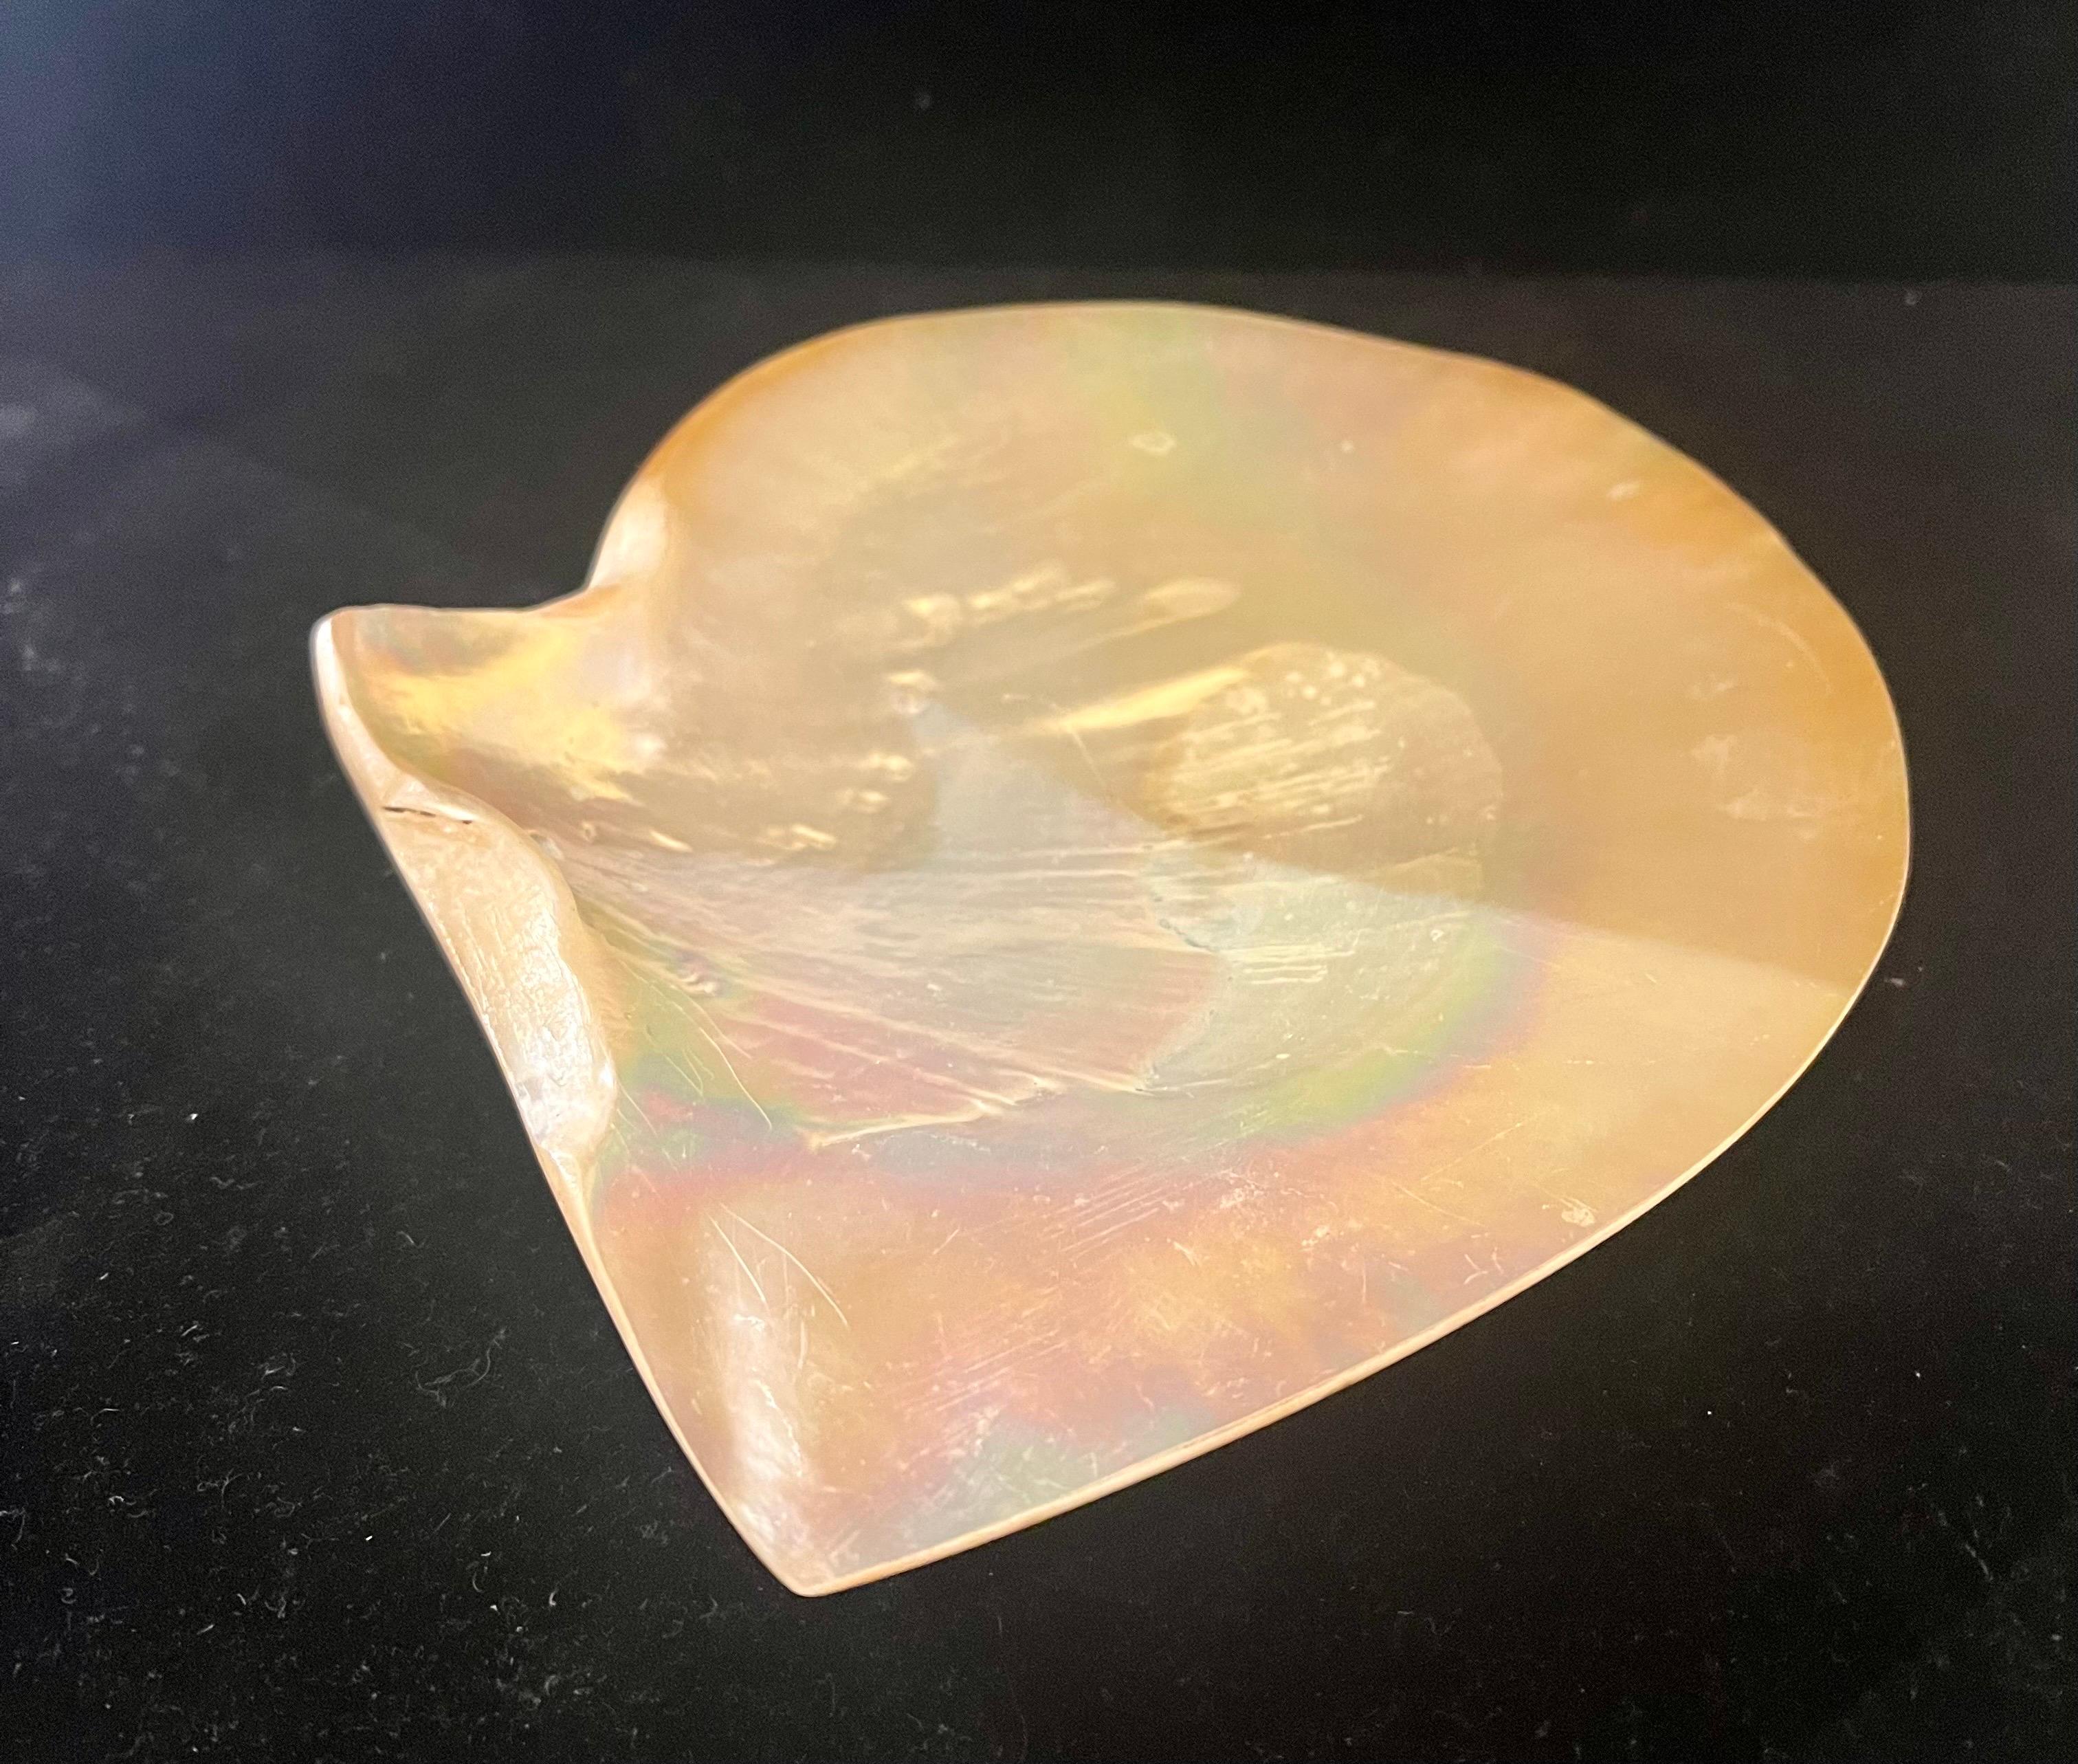 As found Beautiful Mother of Pearl Irredescent Large Mussel Clam Half Shell , circa 1970's nice condition can be used as soap or candy dish.